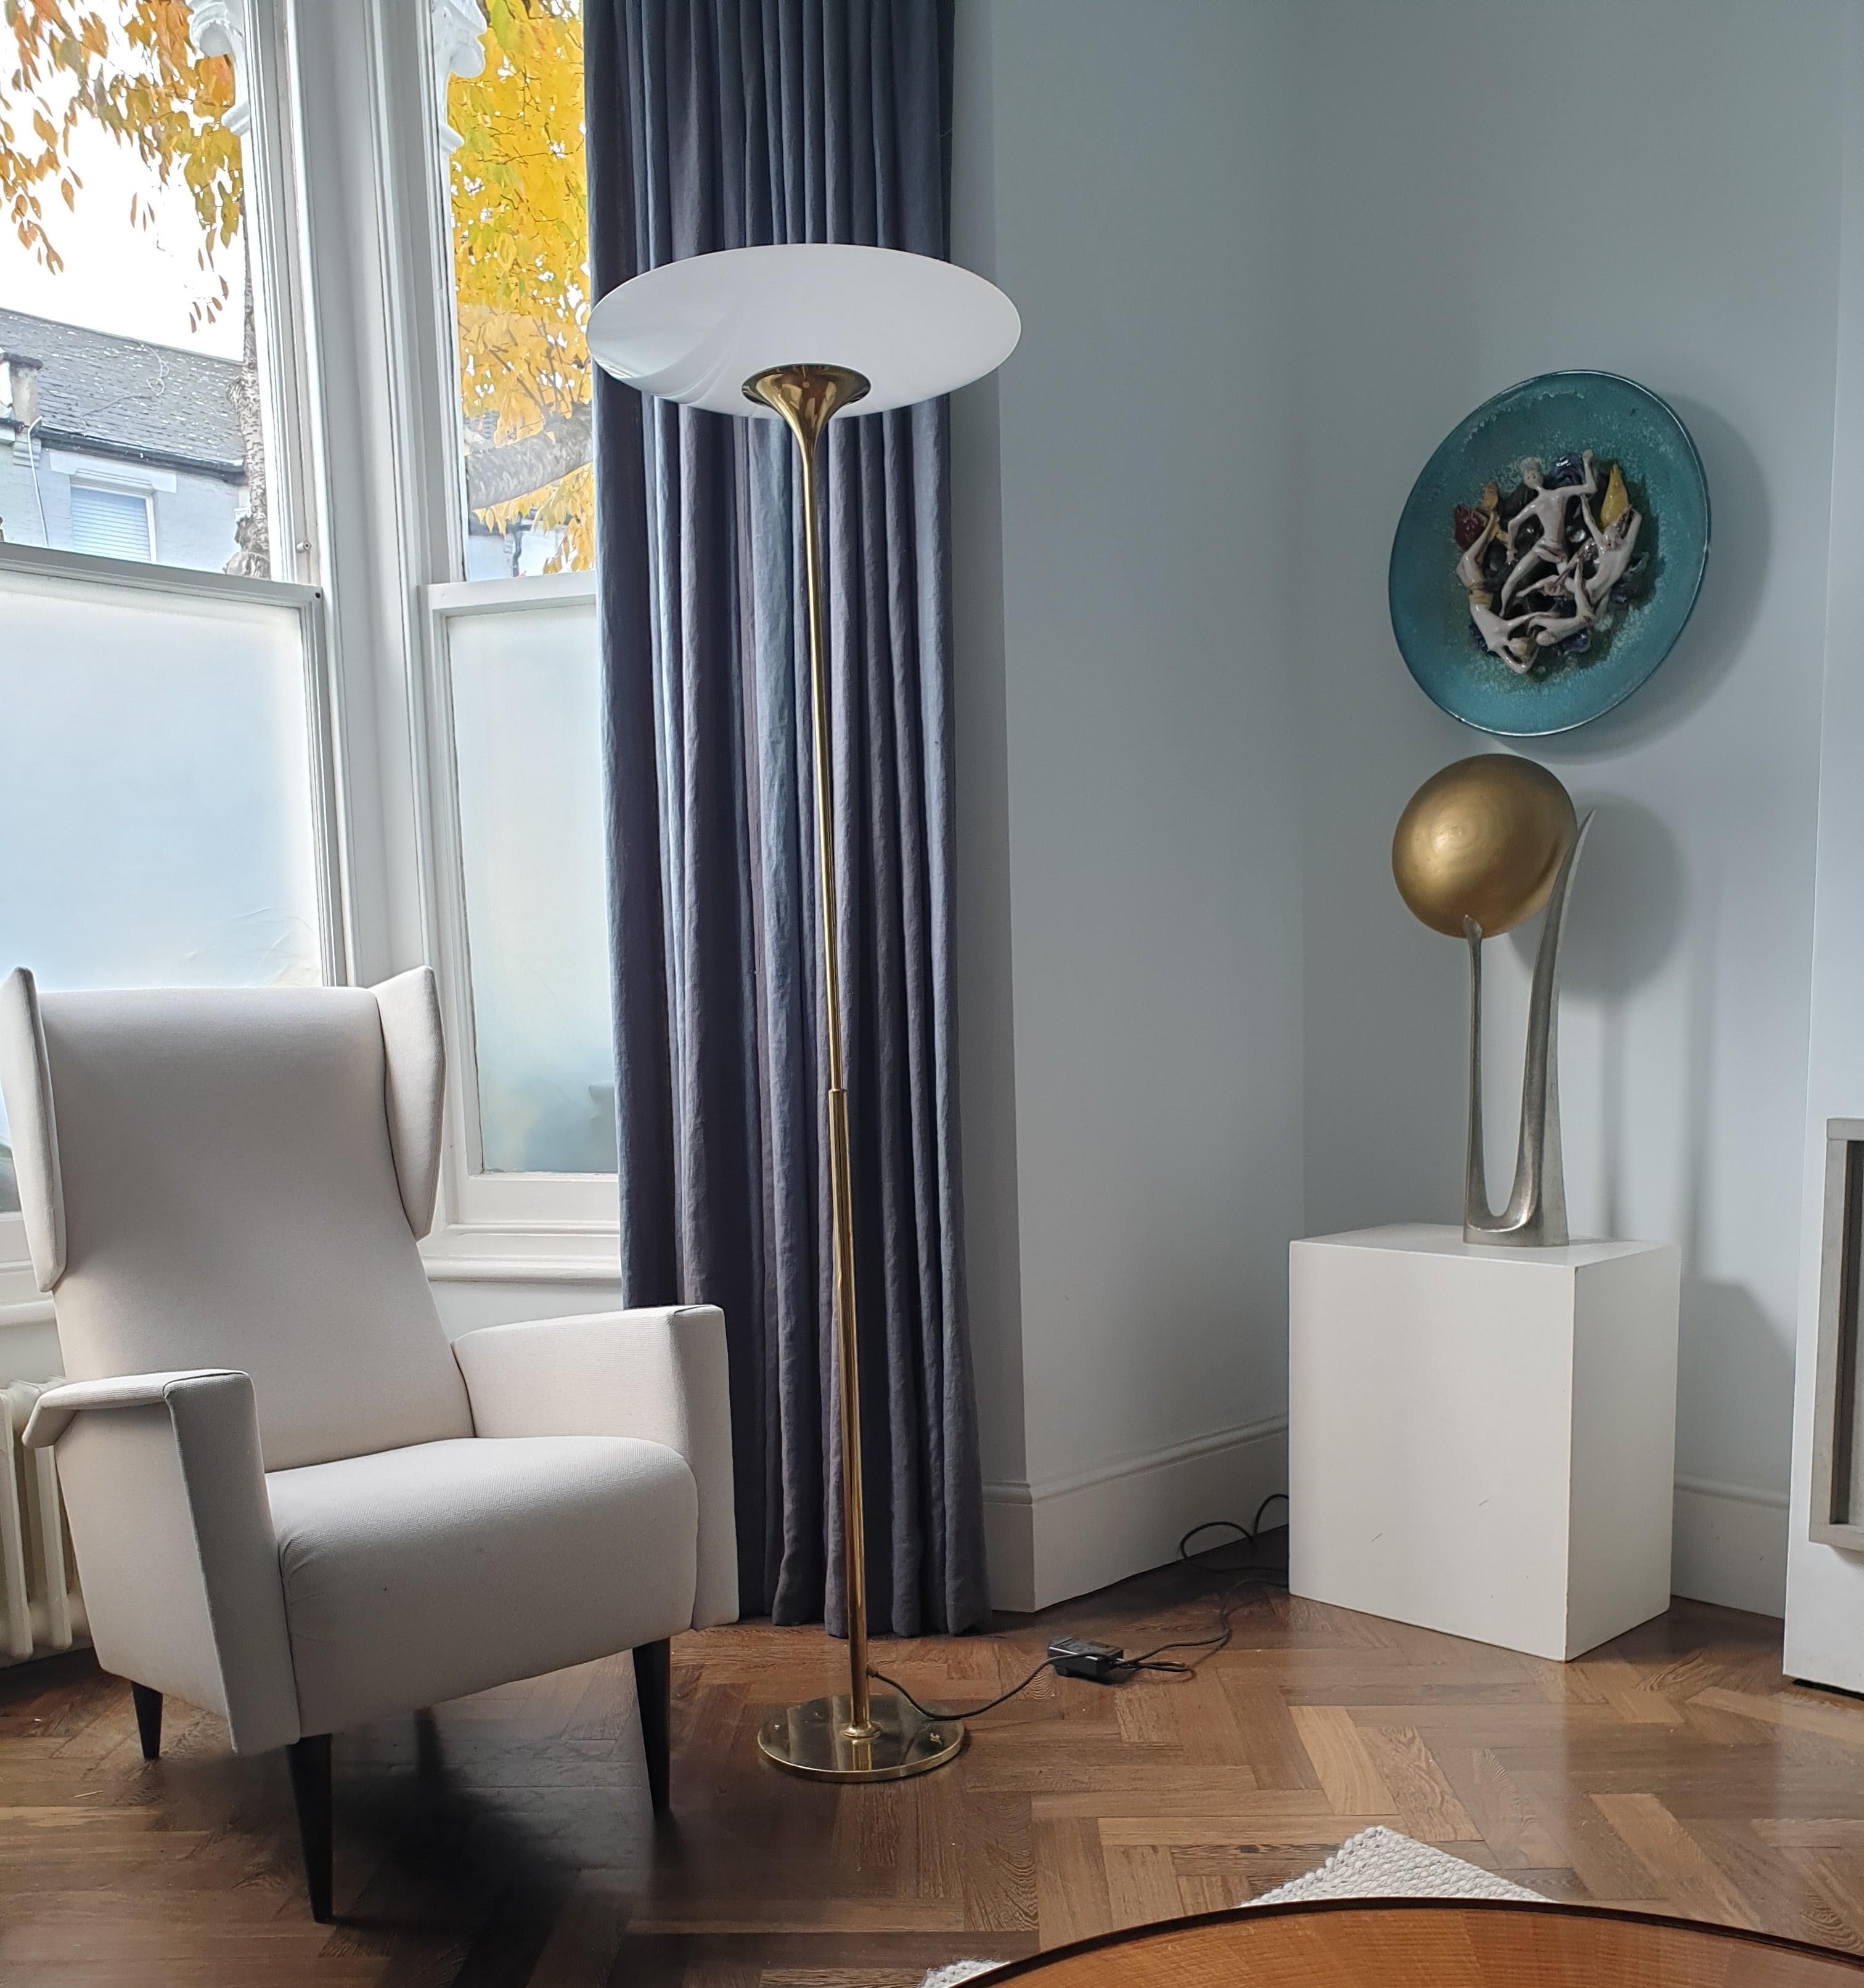 Elegant Floor lamp with brass base and stem and upcurved opaque glass shade by Atelier Jean Perzel, France. This tall floor lamp is perfect for rooms with high ceilings and its simplicity of form means it will grace any style of Interior - something